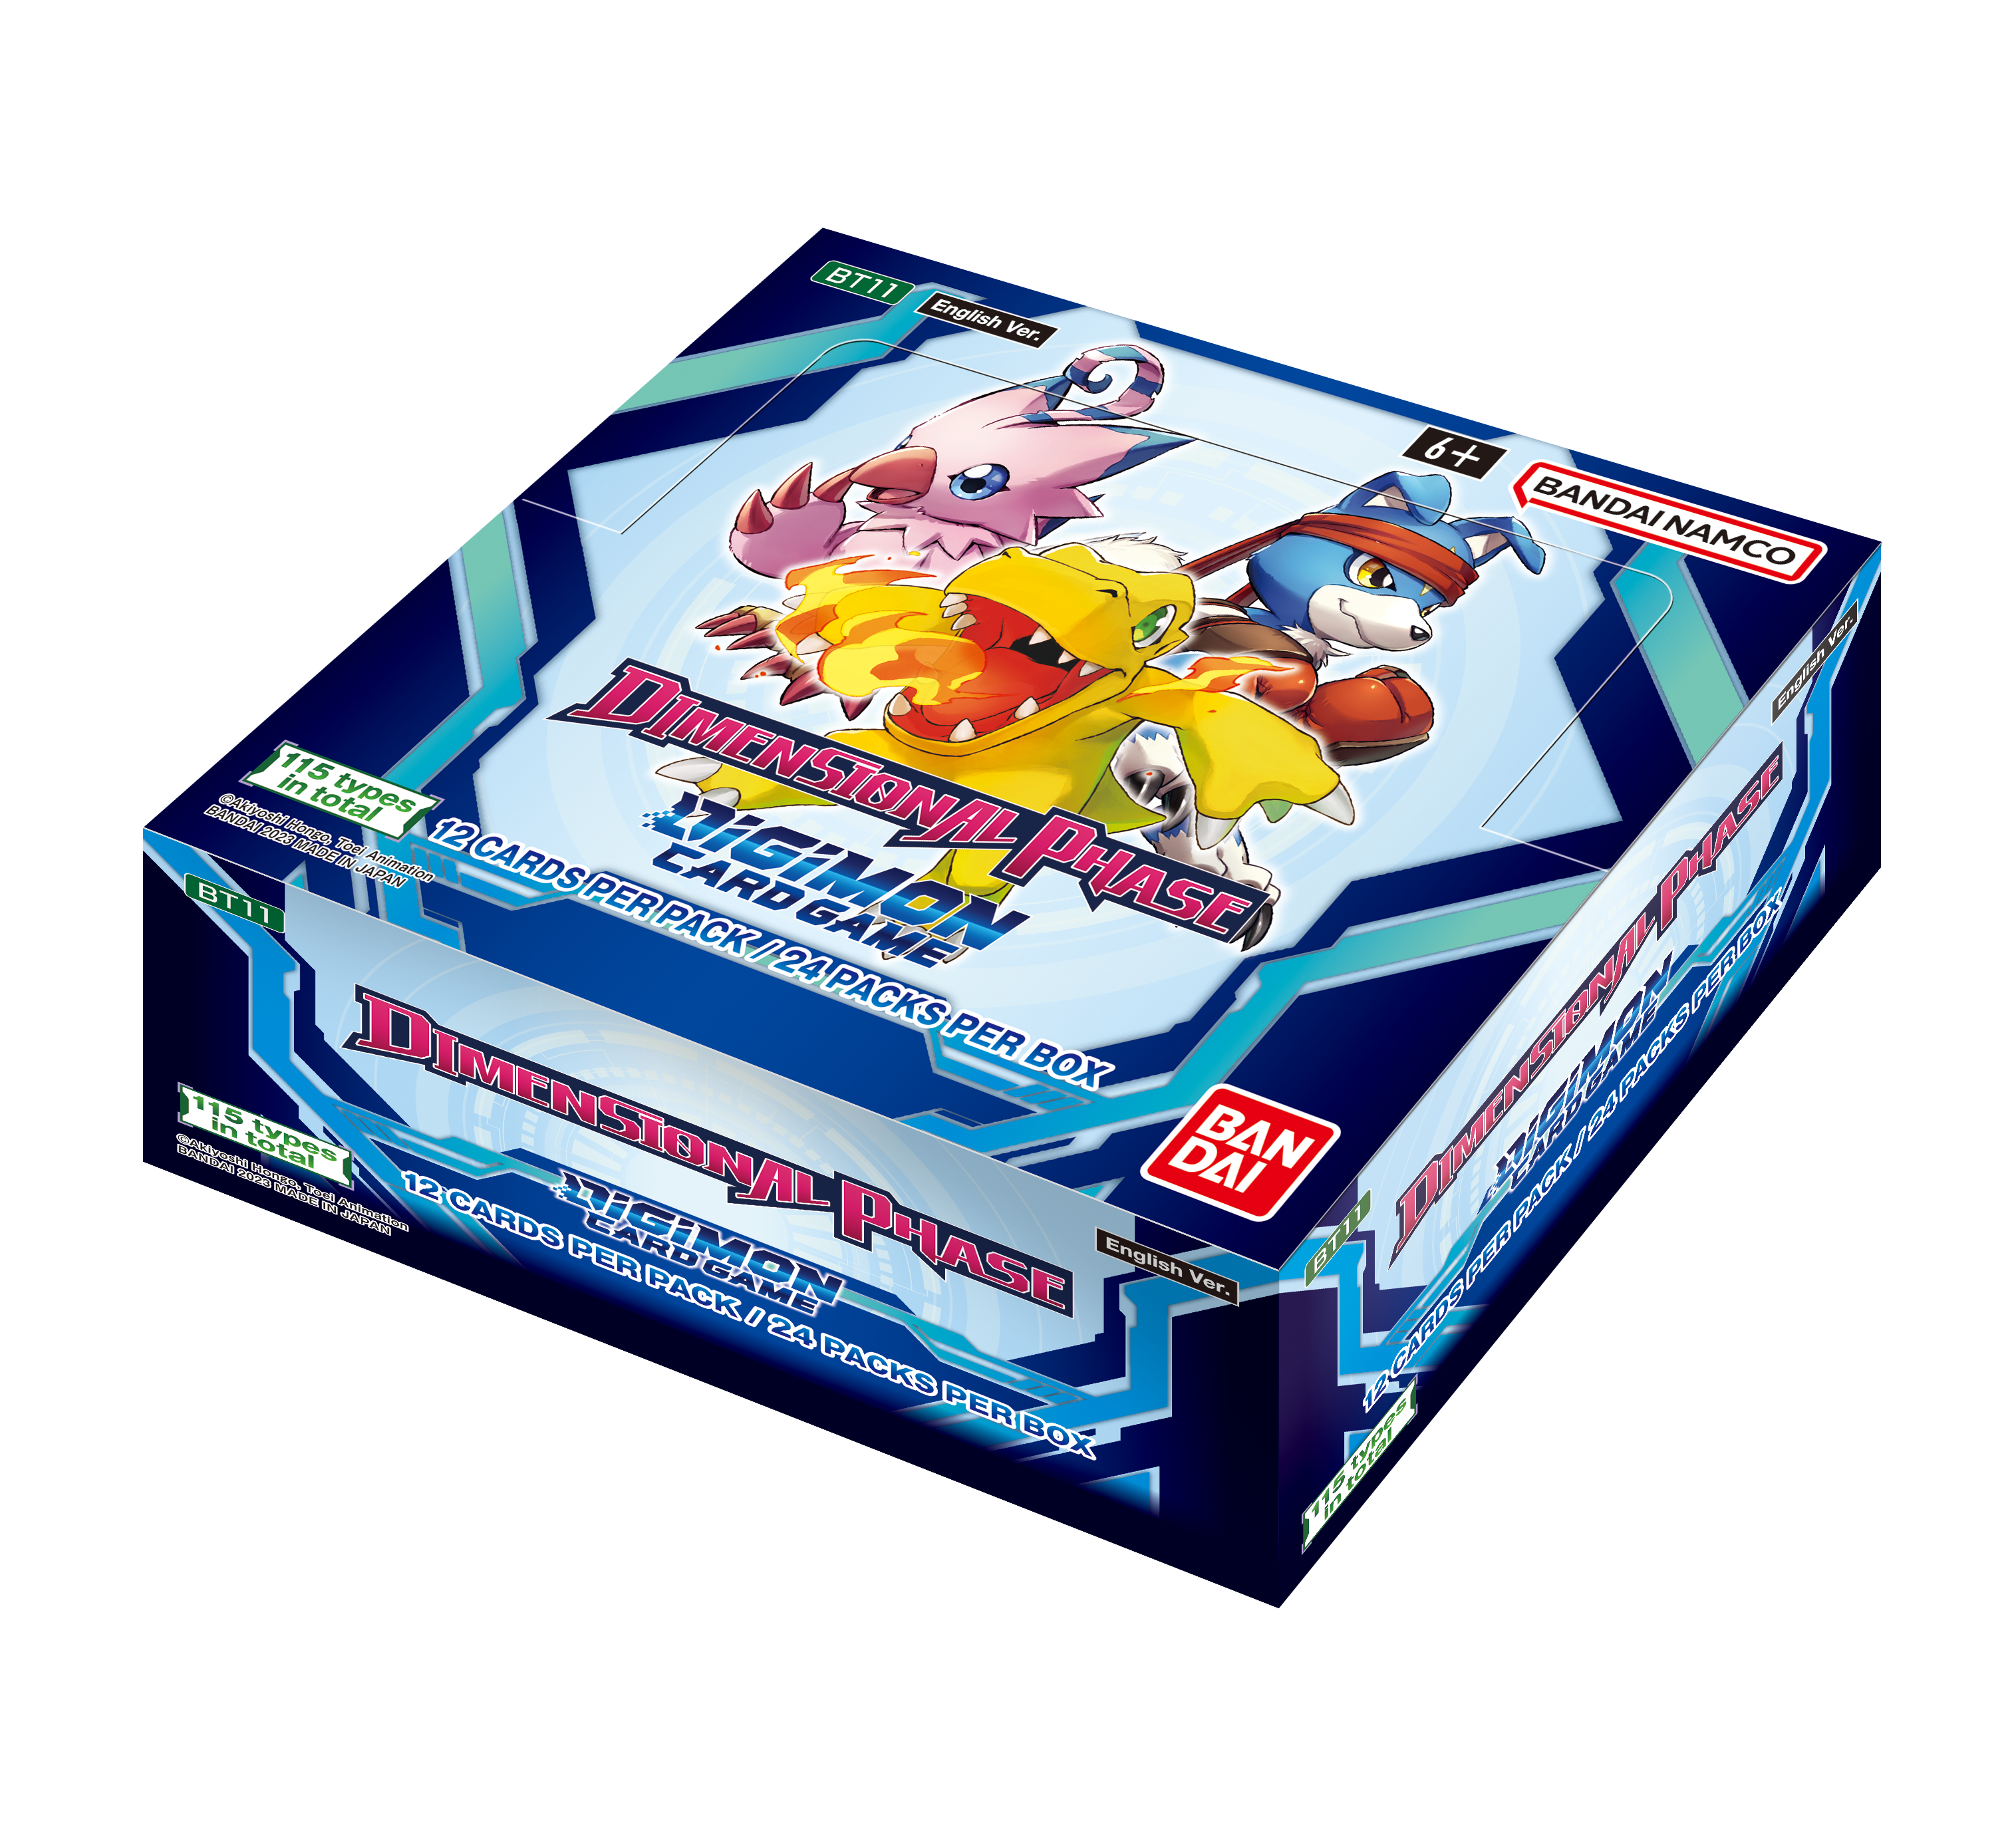 Digimon Card Game: Dimensional Phase Booster Box